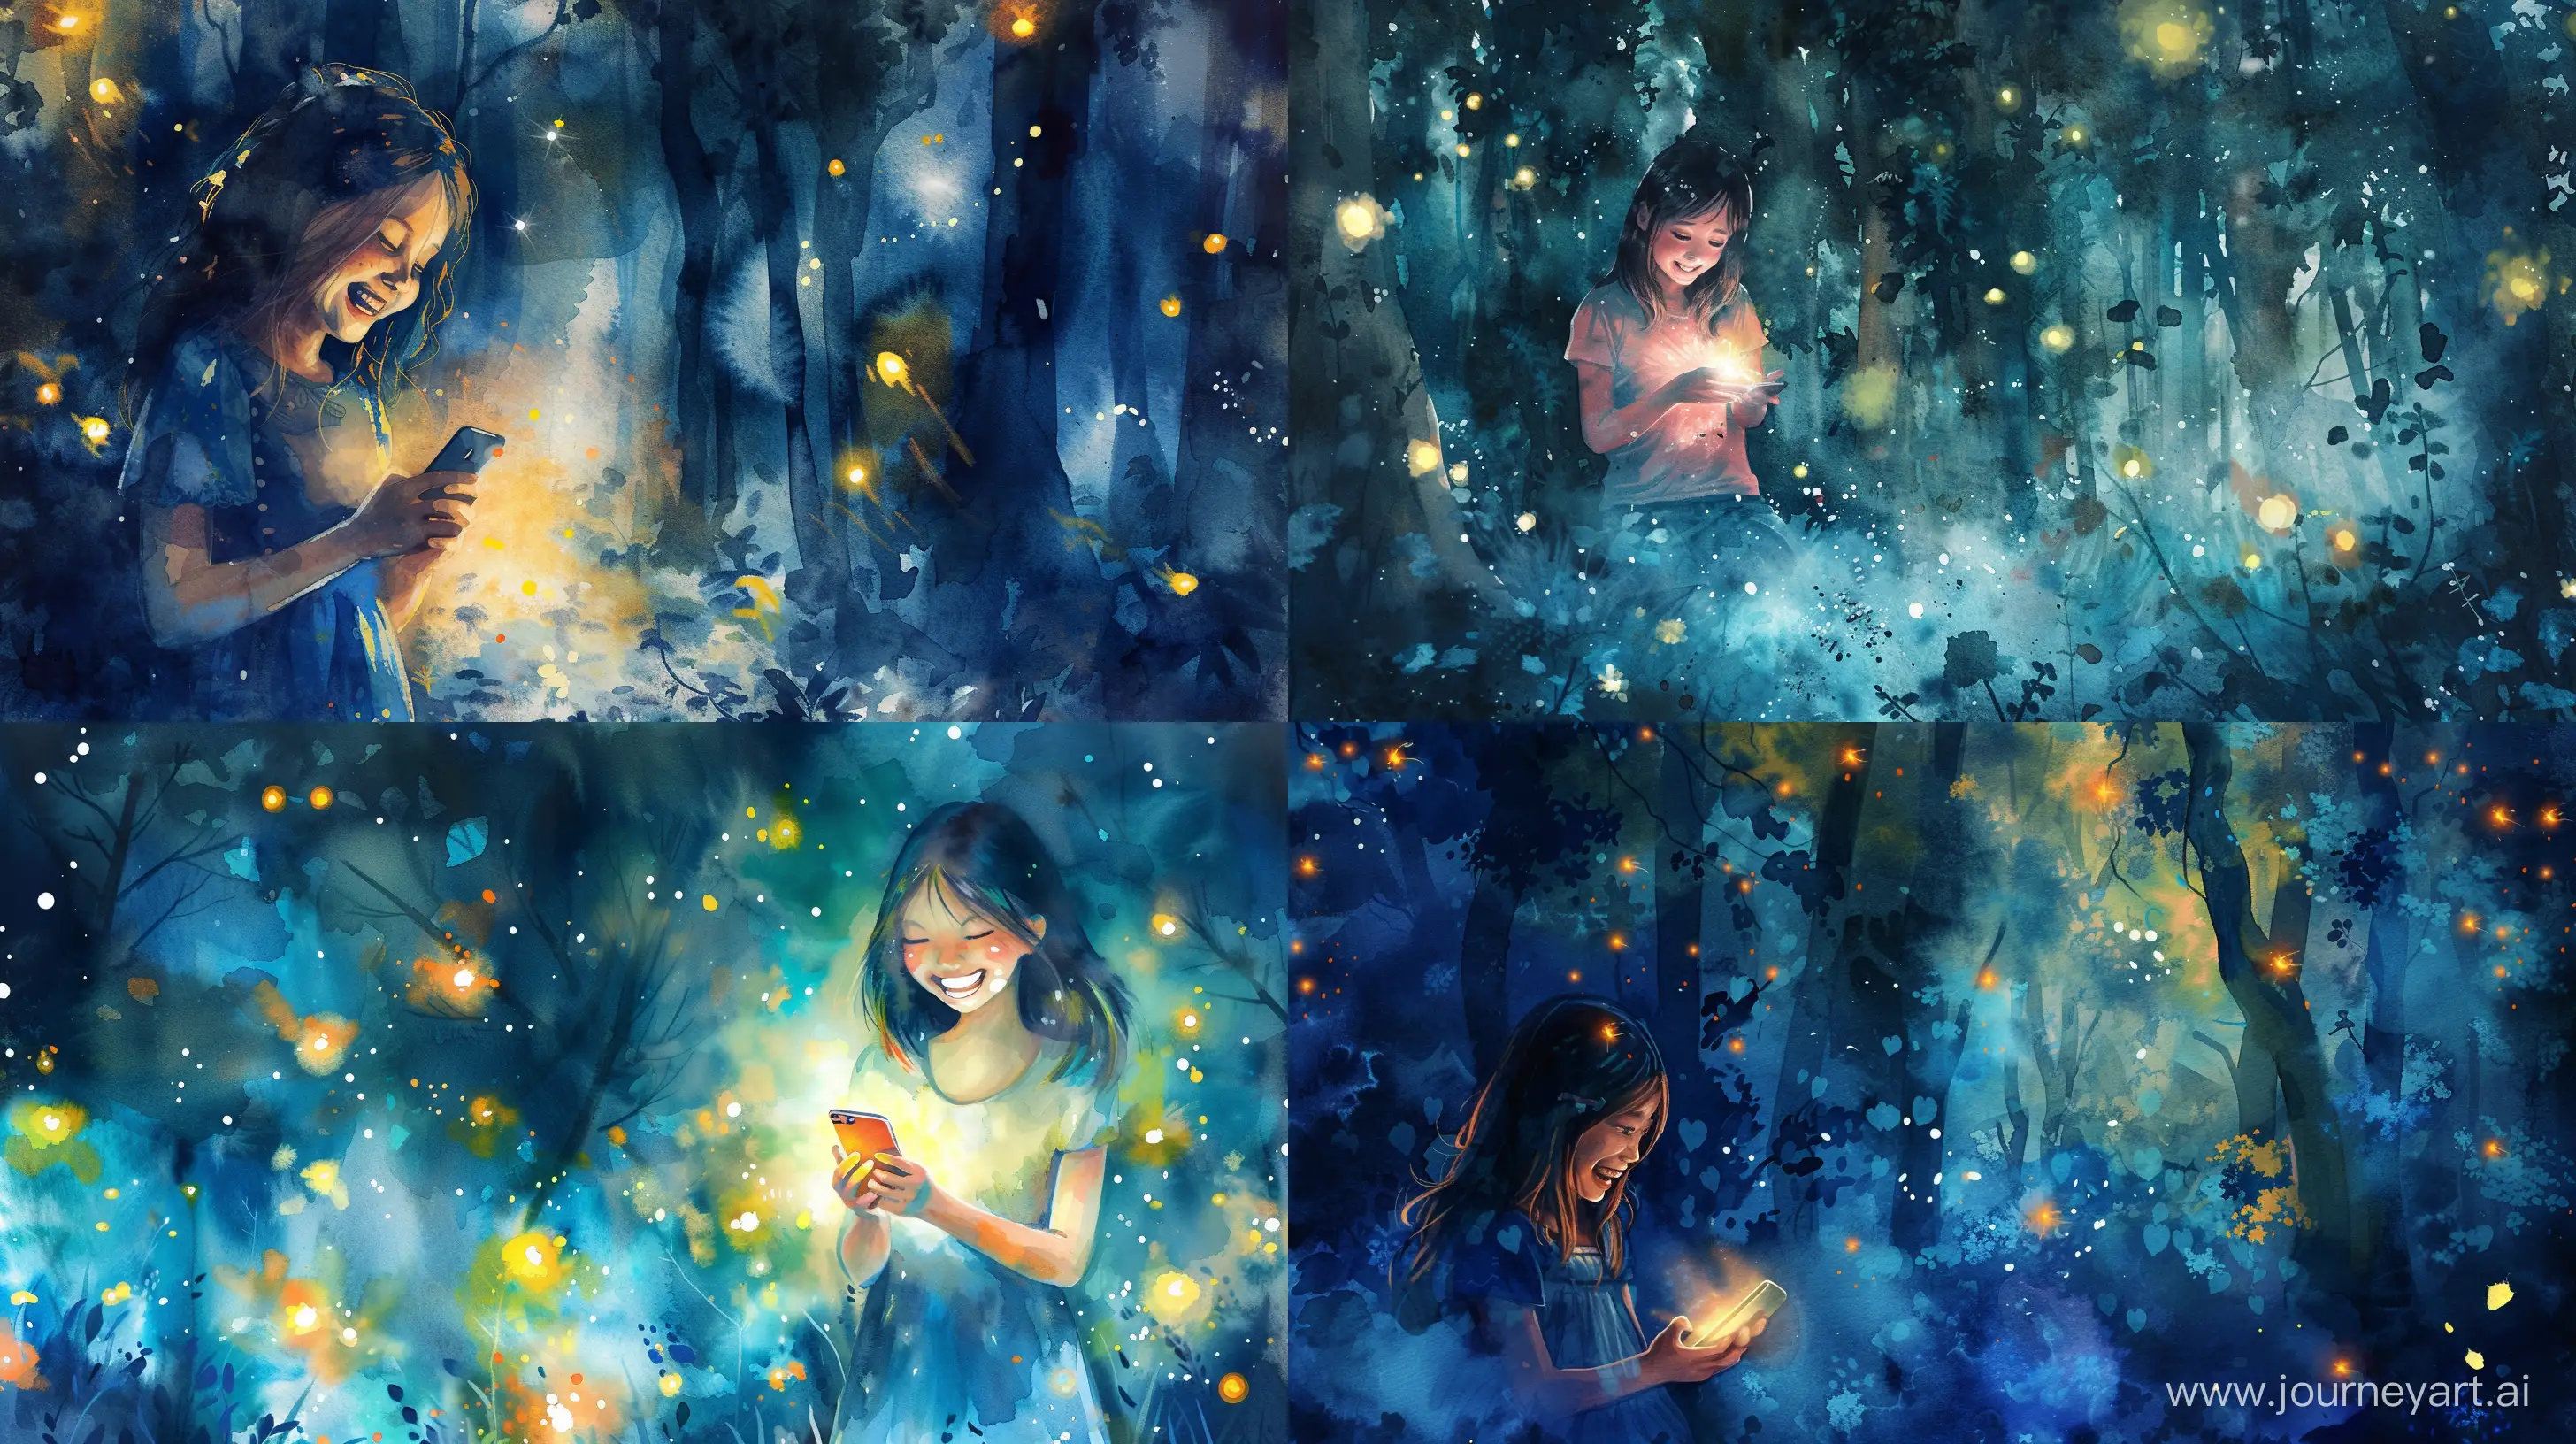 A delighted girl, absorbed in her mobile phone's glow, laughter resonating in a magical forest at night, cinematic lighting accentuating the mystique, fireflies dancing around, creating an enchanting and whimsical atmosphere, Artwork, watercolor painting, --ar 16:9 --v 6